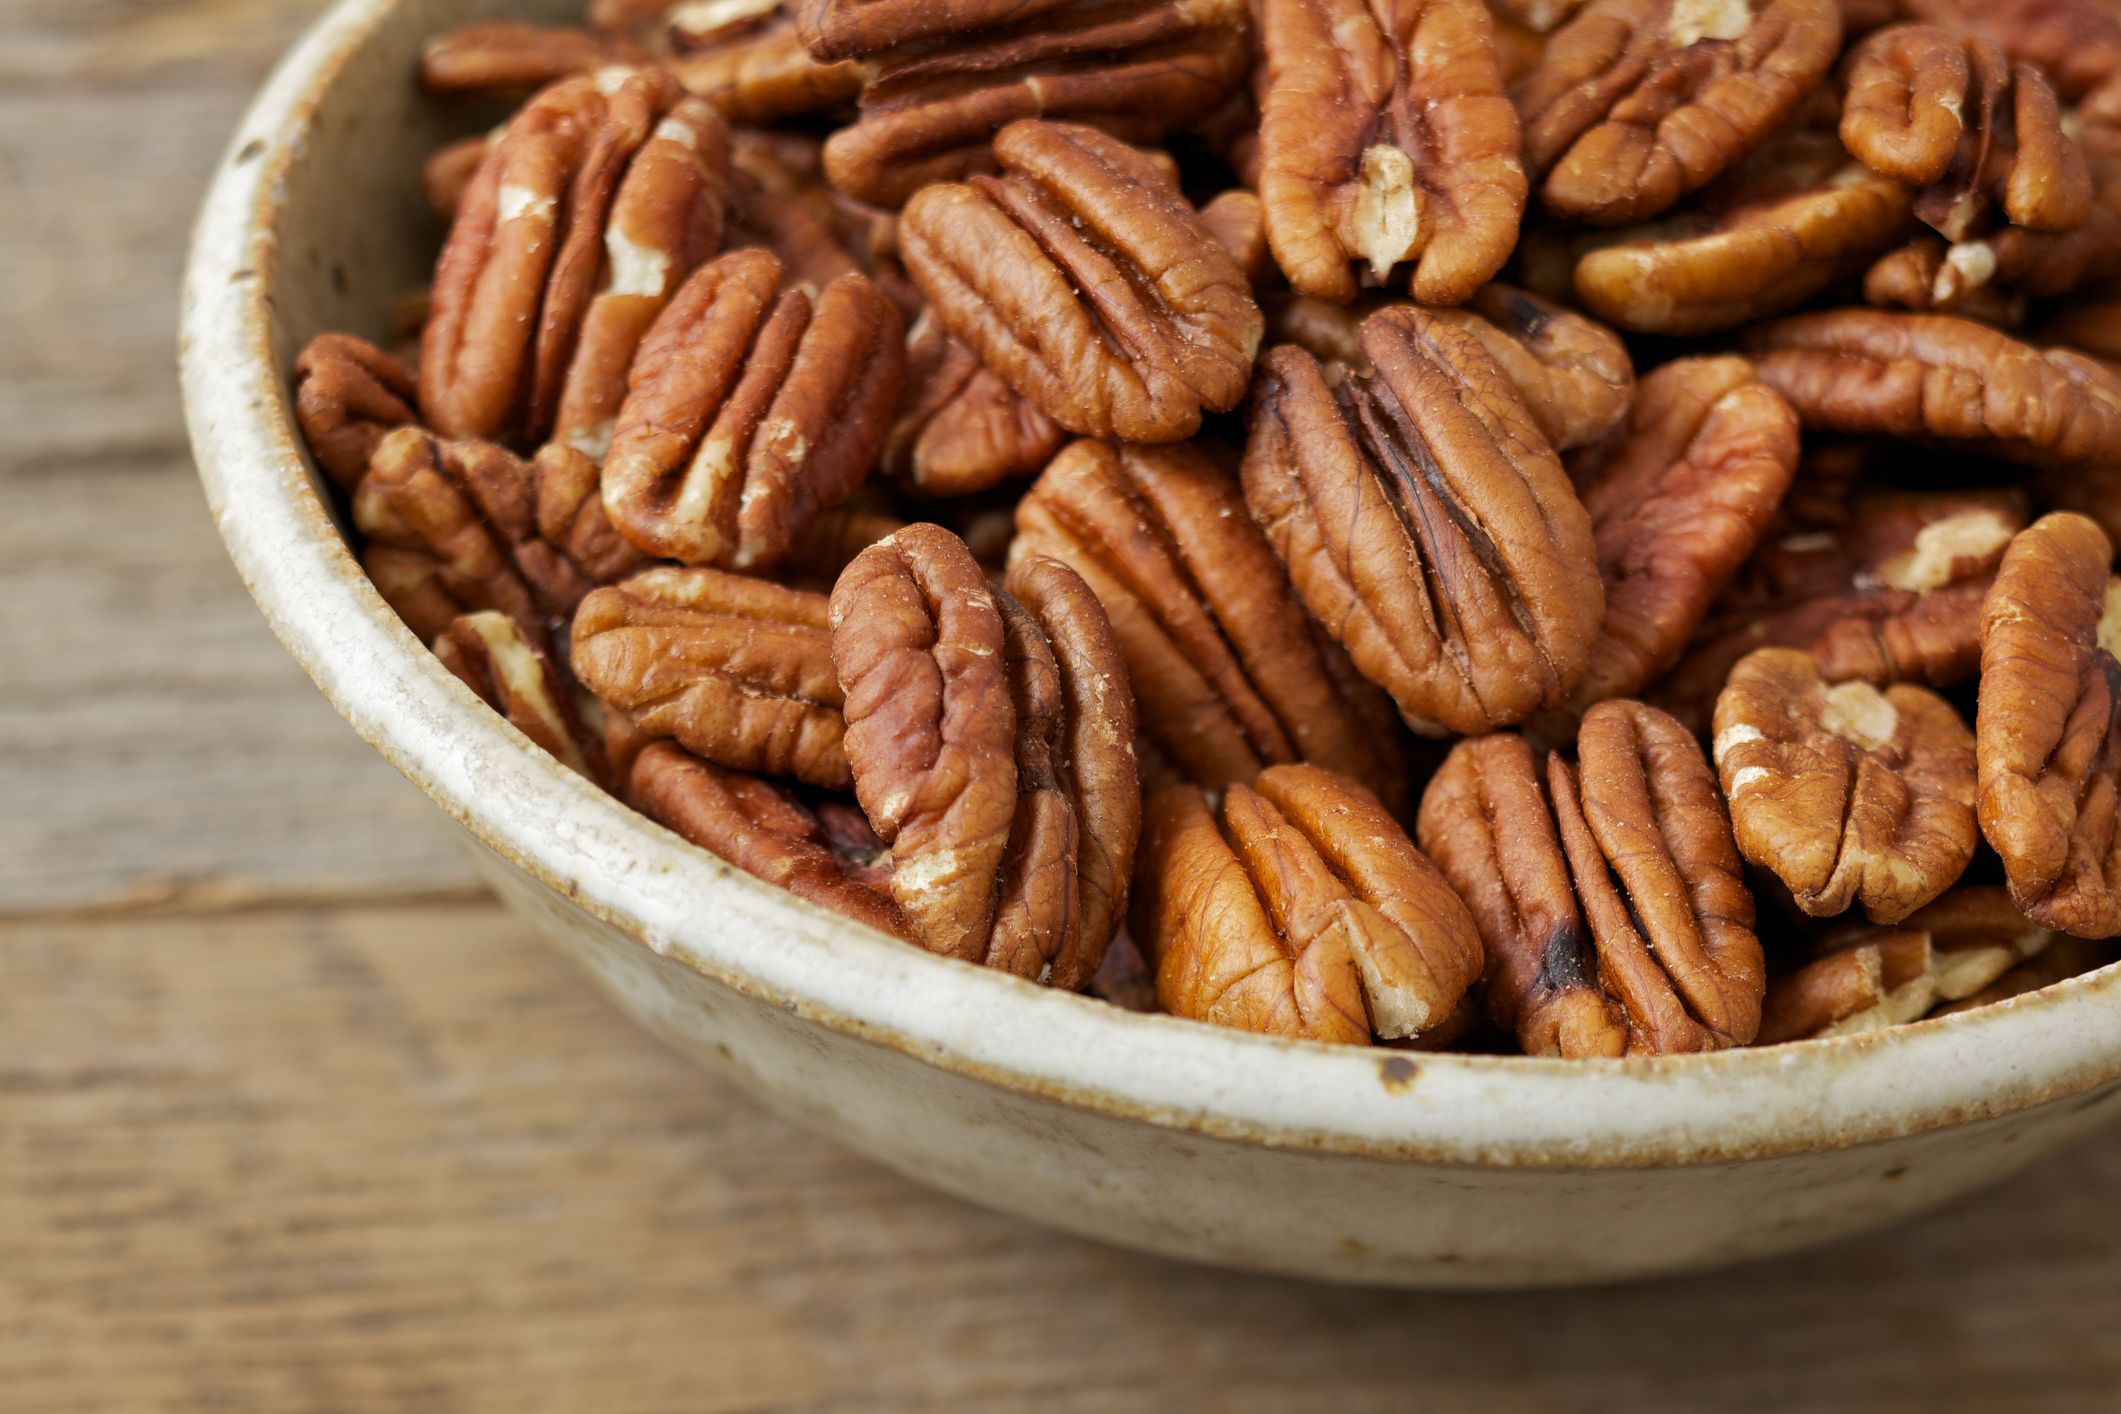 9 Health Benefits of Pecans - Are Pecans Good for You?